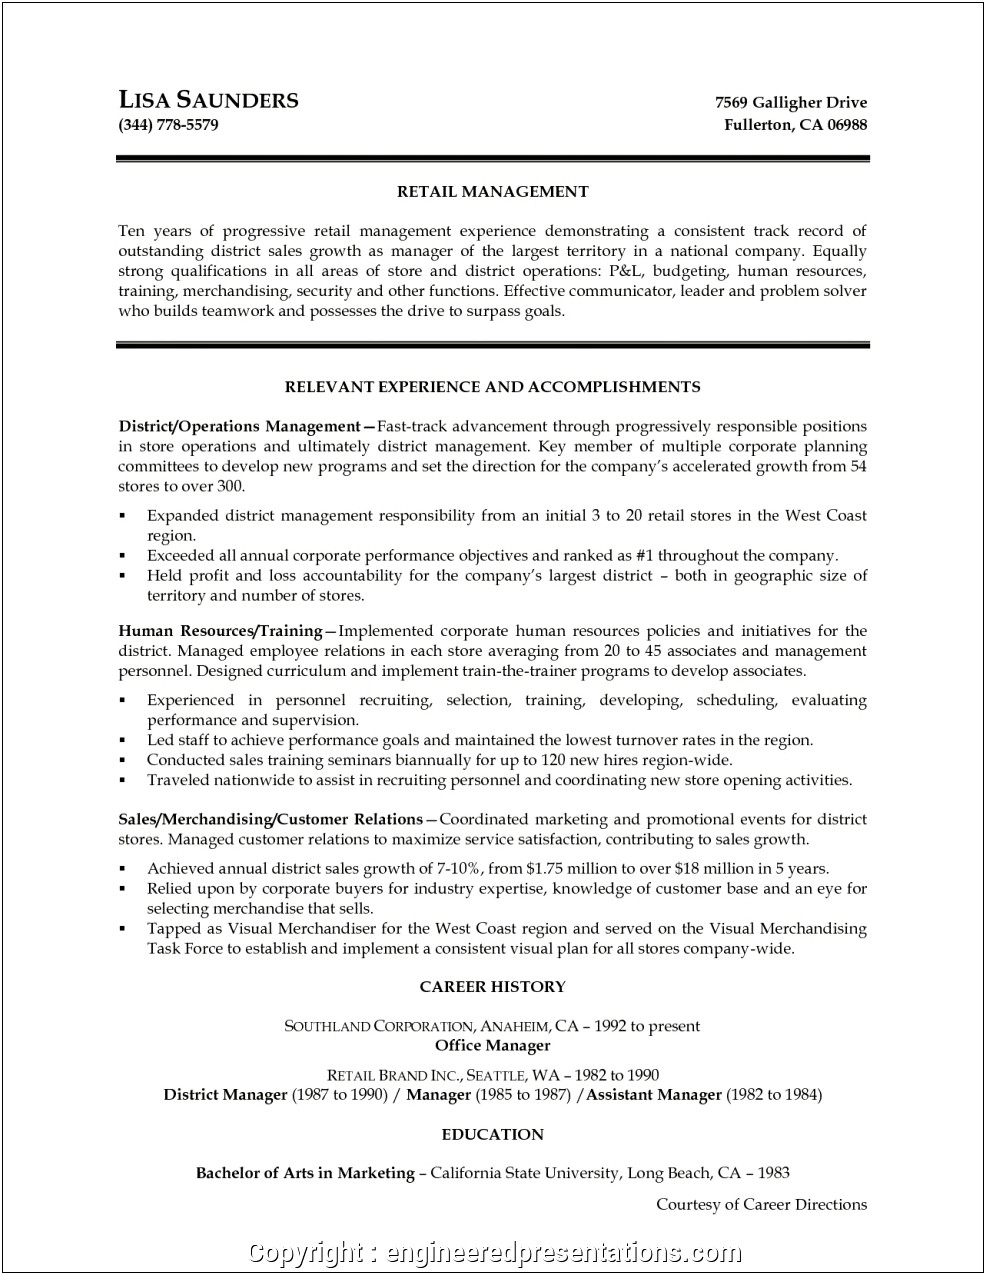 Resume Objective For Operations Managers